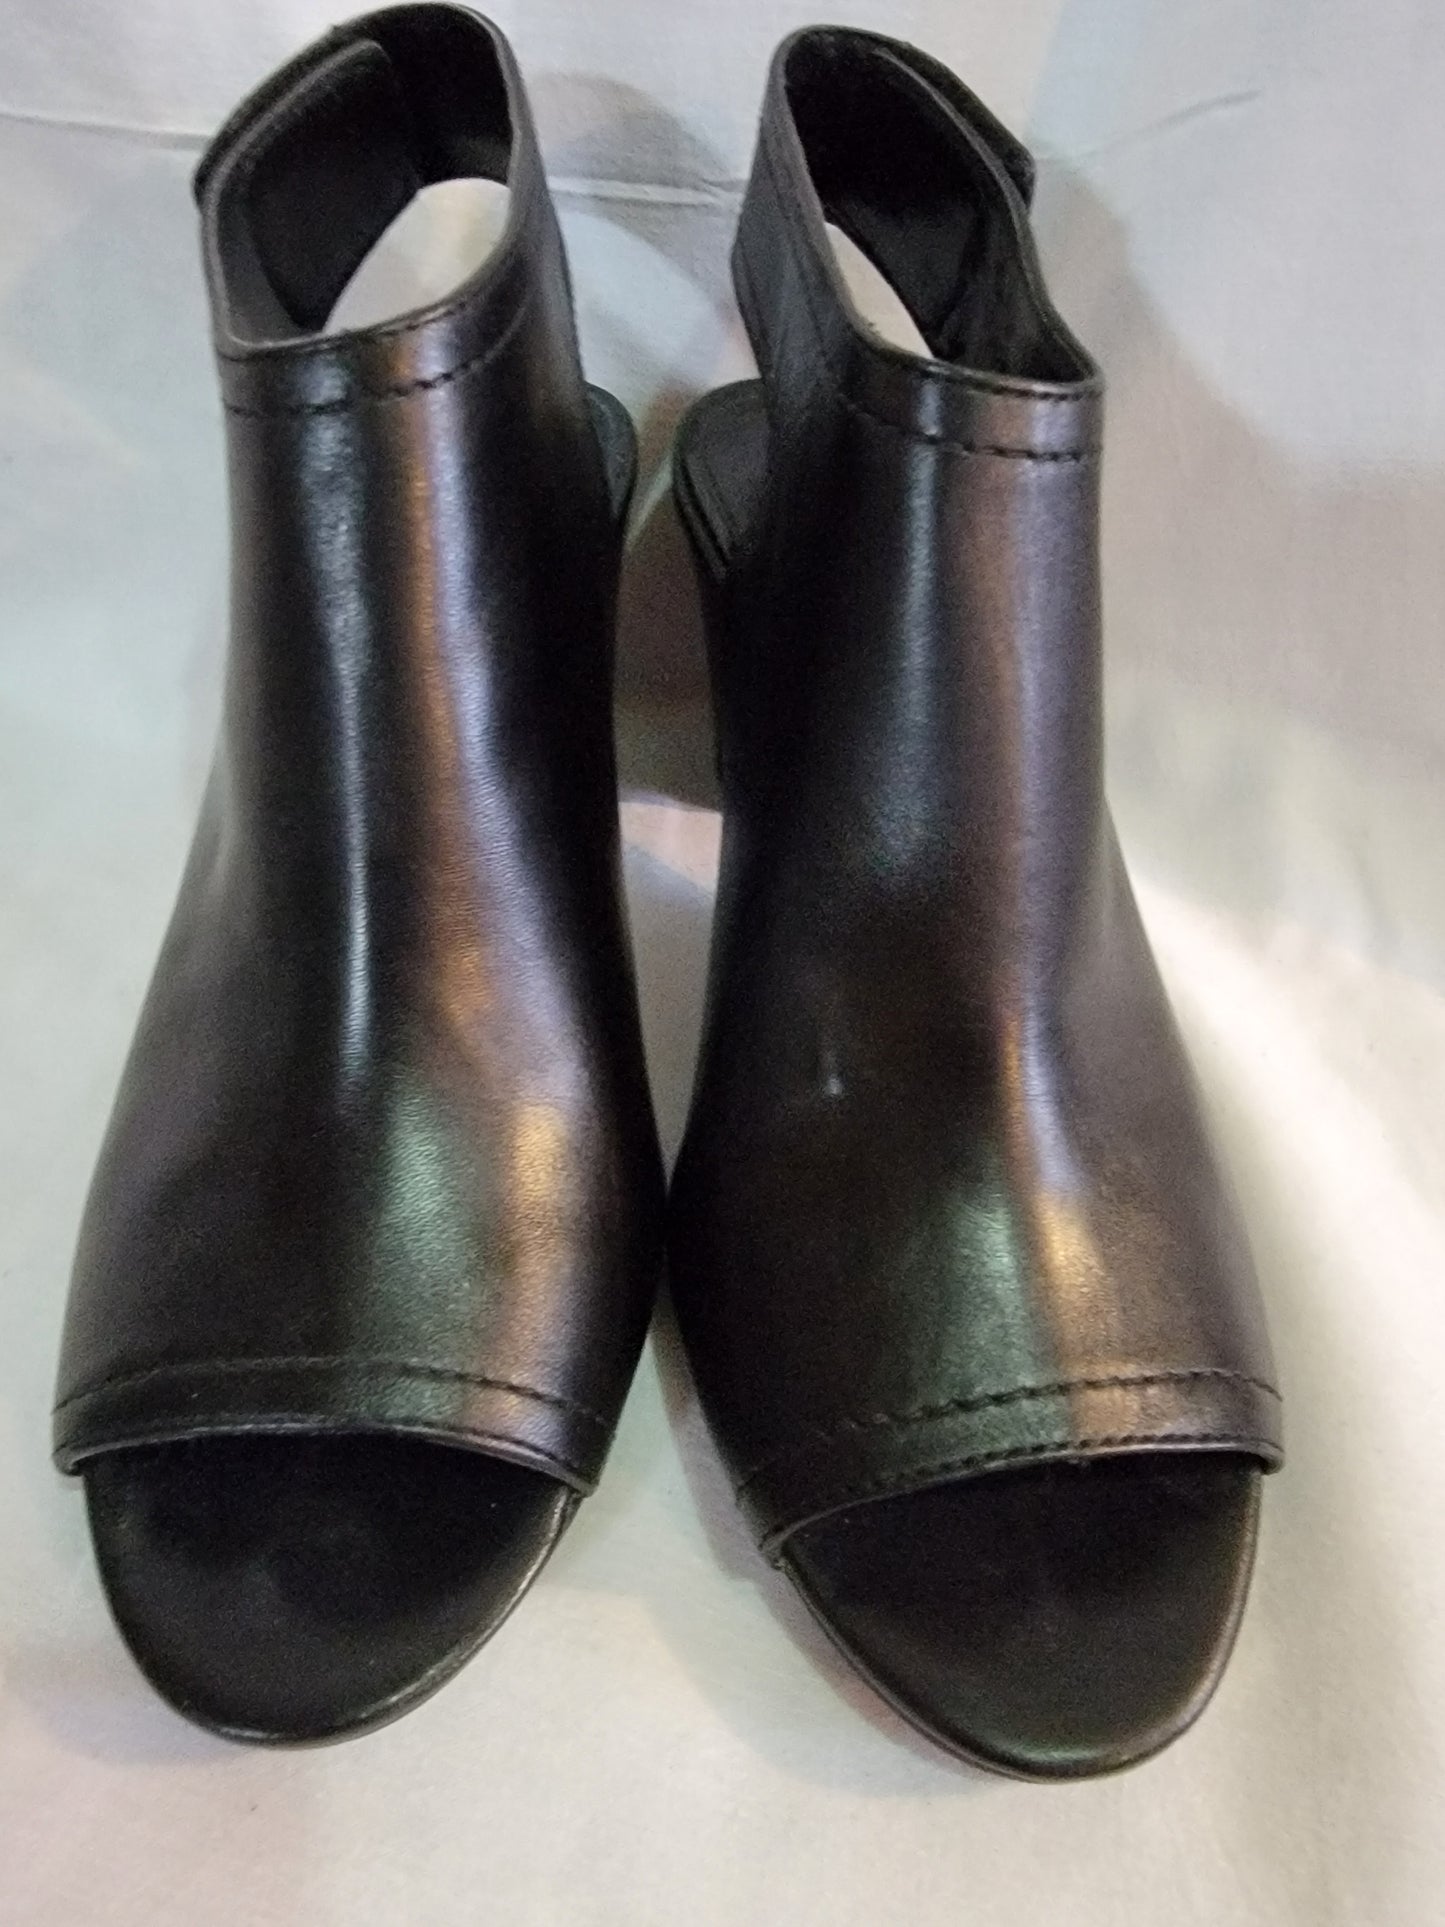 H by HALSTON LINDA - Black Leather Peep-Toe Ankle Boots